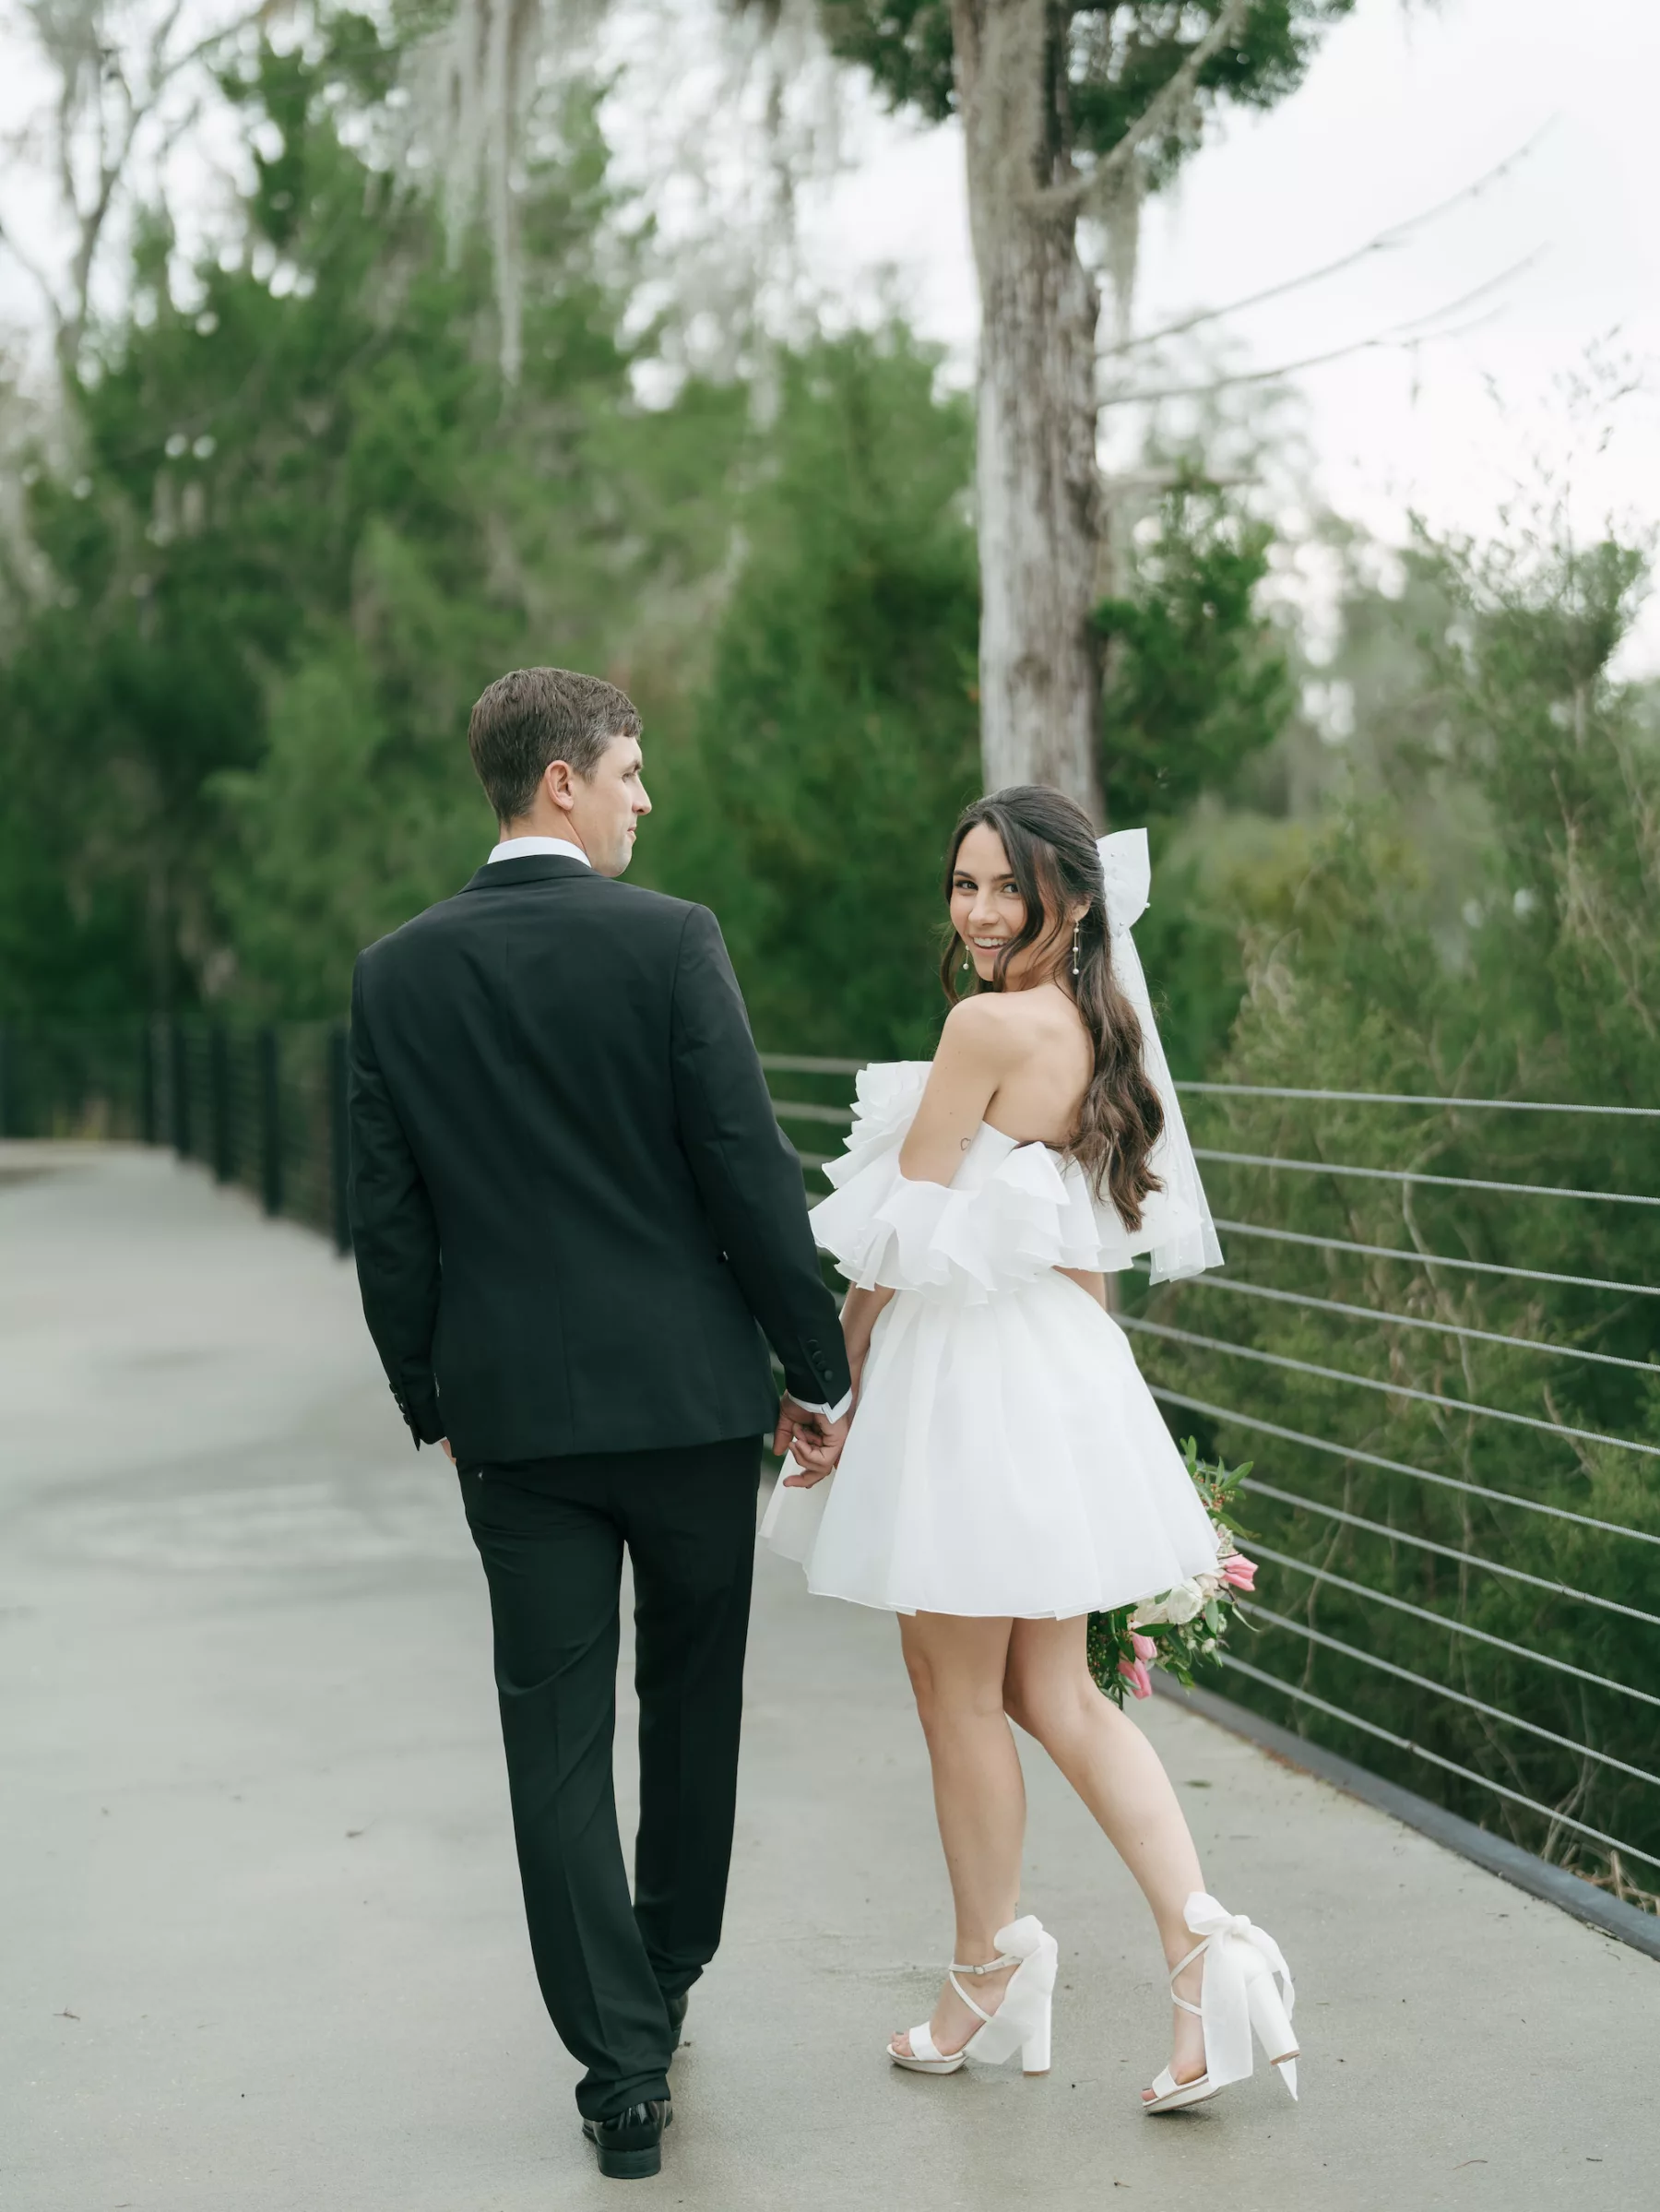 Bride and Groom Just Married Wedding Portrait | Off the Shoulder Ruffle Mini Wedding Dress Inspiration | Tampa Bay Photographer Amber Yonker Photography